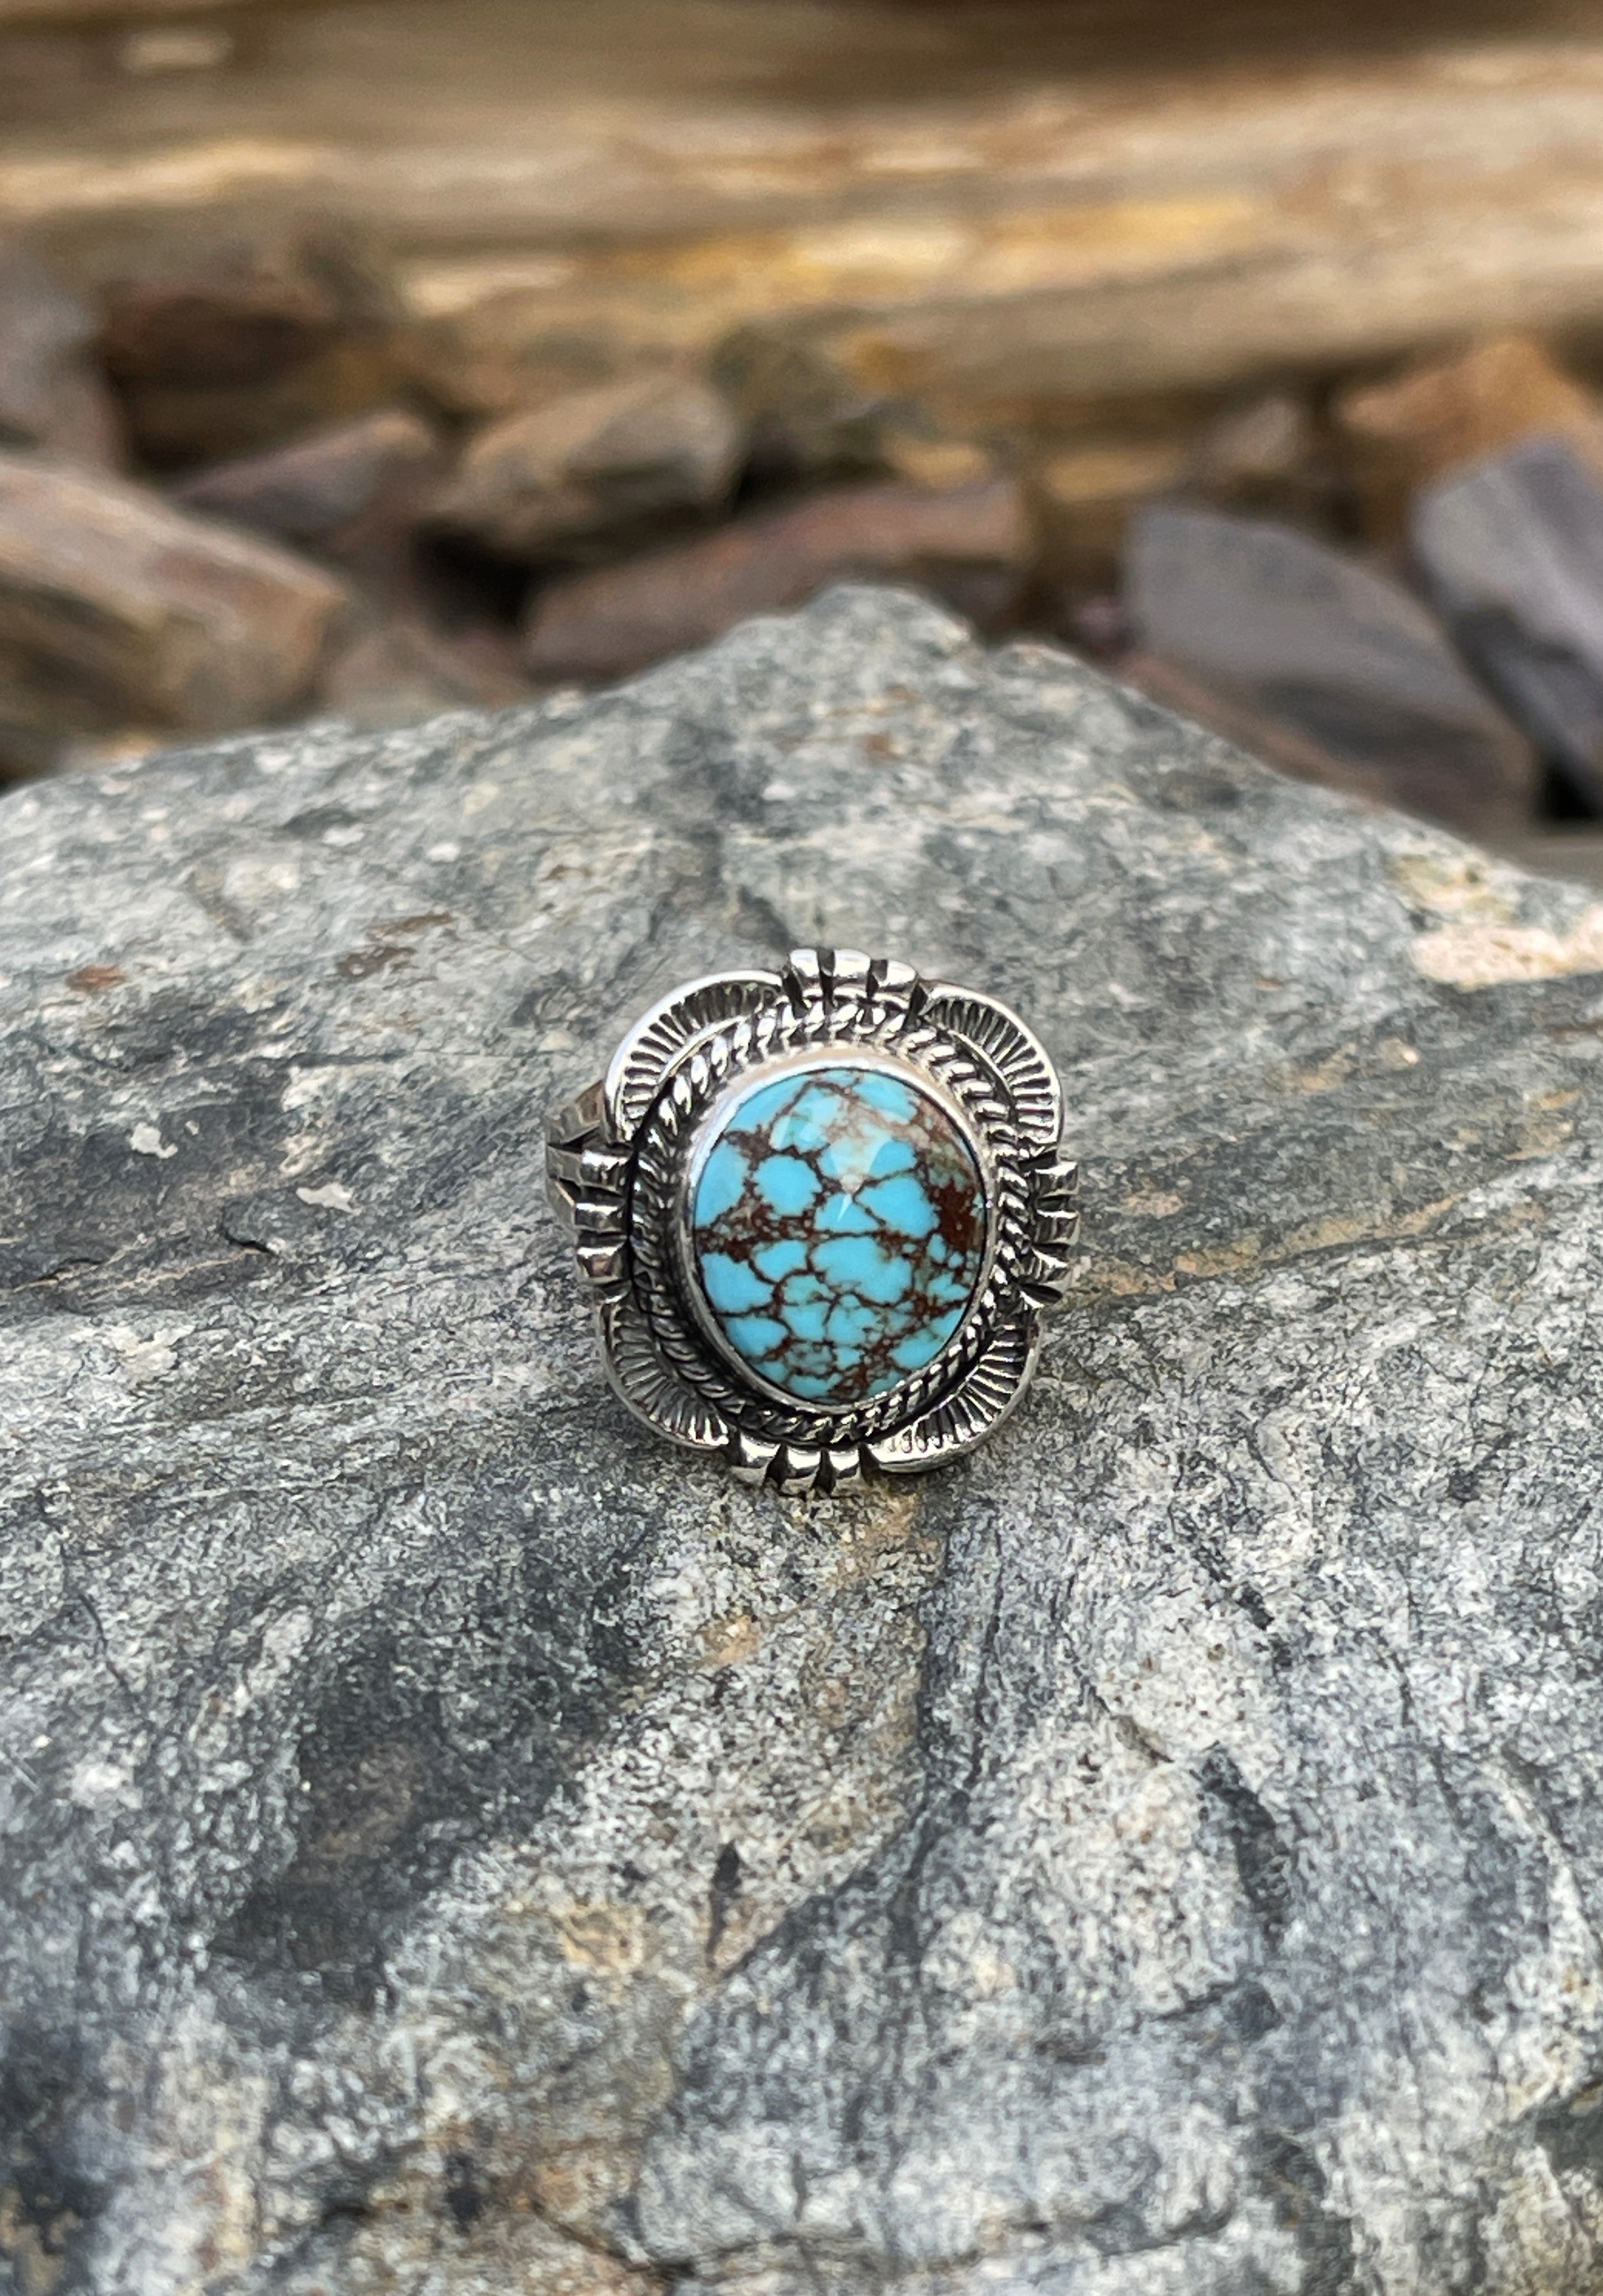 Handmade Solid Sterling Silver Kingman Turquoise Ring with Traditional Hand Stamping - Size 6